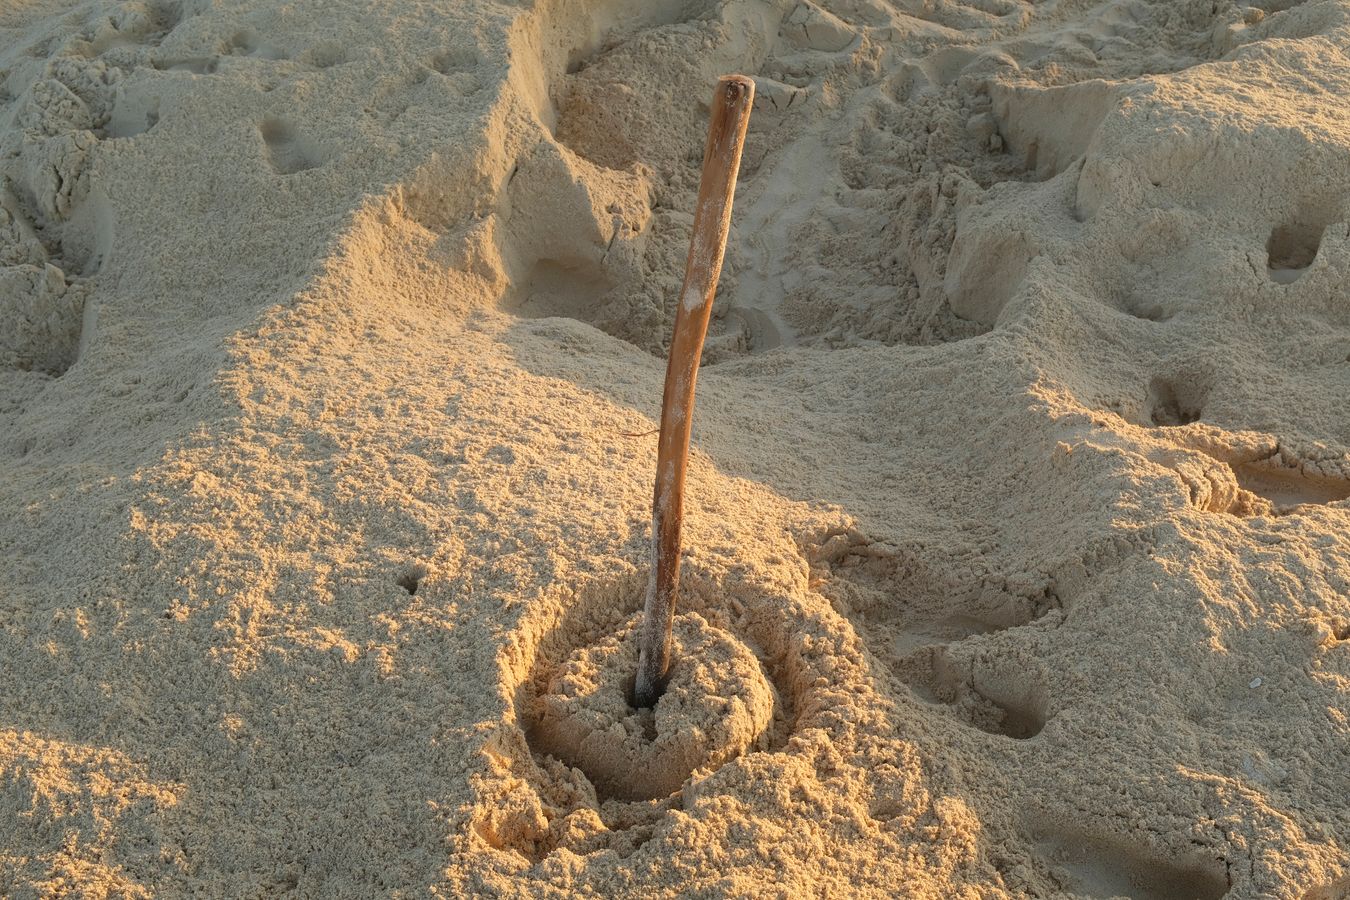 A stick placed by a ranger marks the exact place where the nest with the sea turtle eggs is.